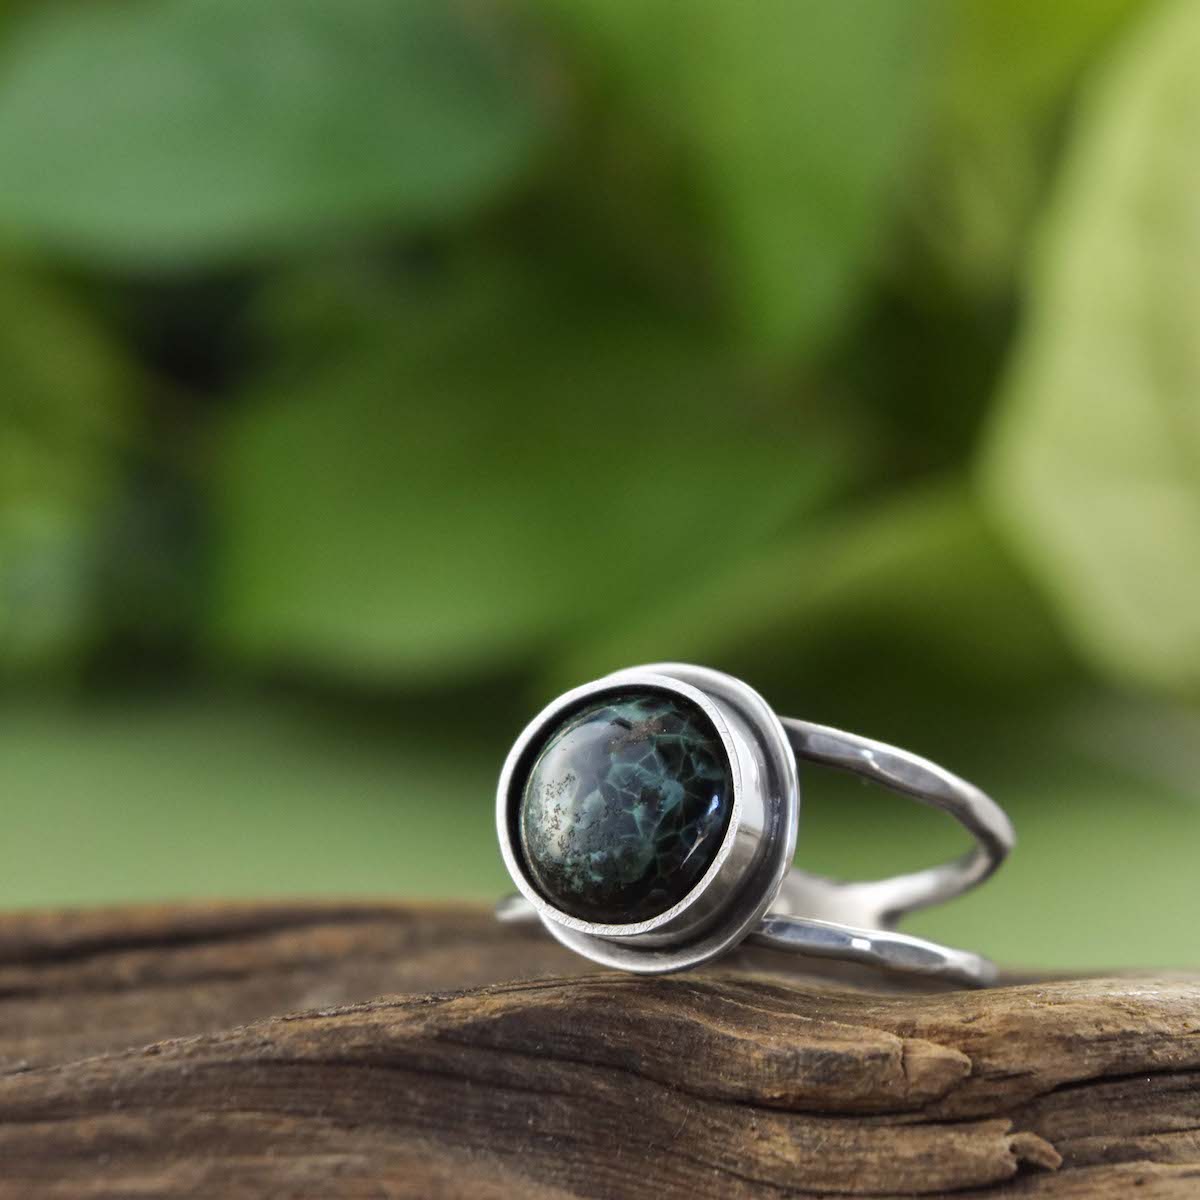 Michigan Greenstone Ring - Choose Your Own Stone - Ring A. 11mm / Greenstone B. 12mm / Greenstone 3147 - handmade by Beth Millner Jewelry